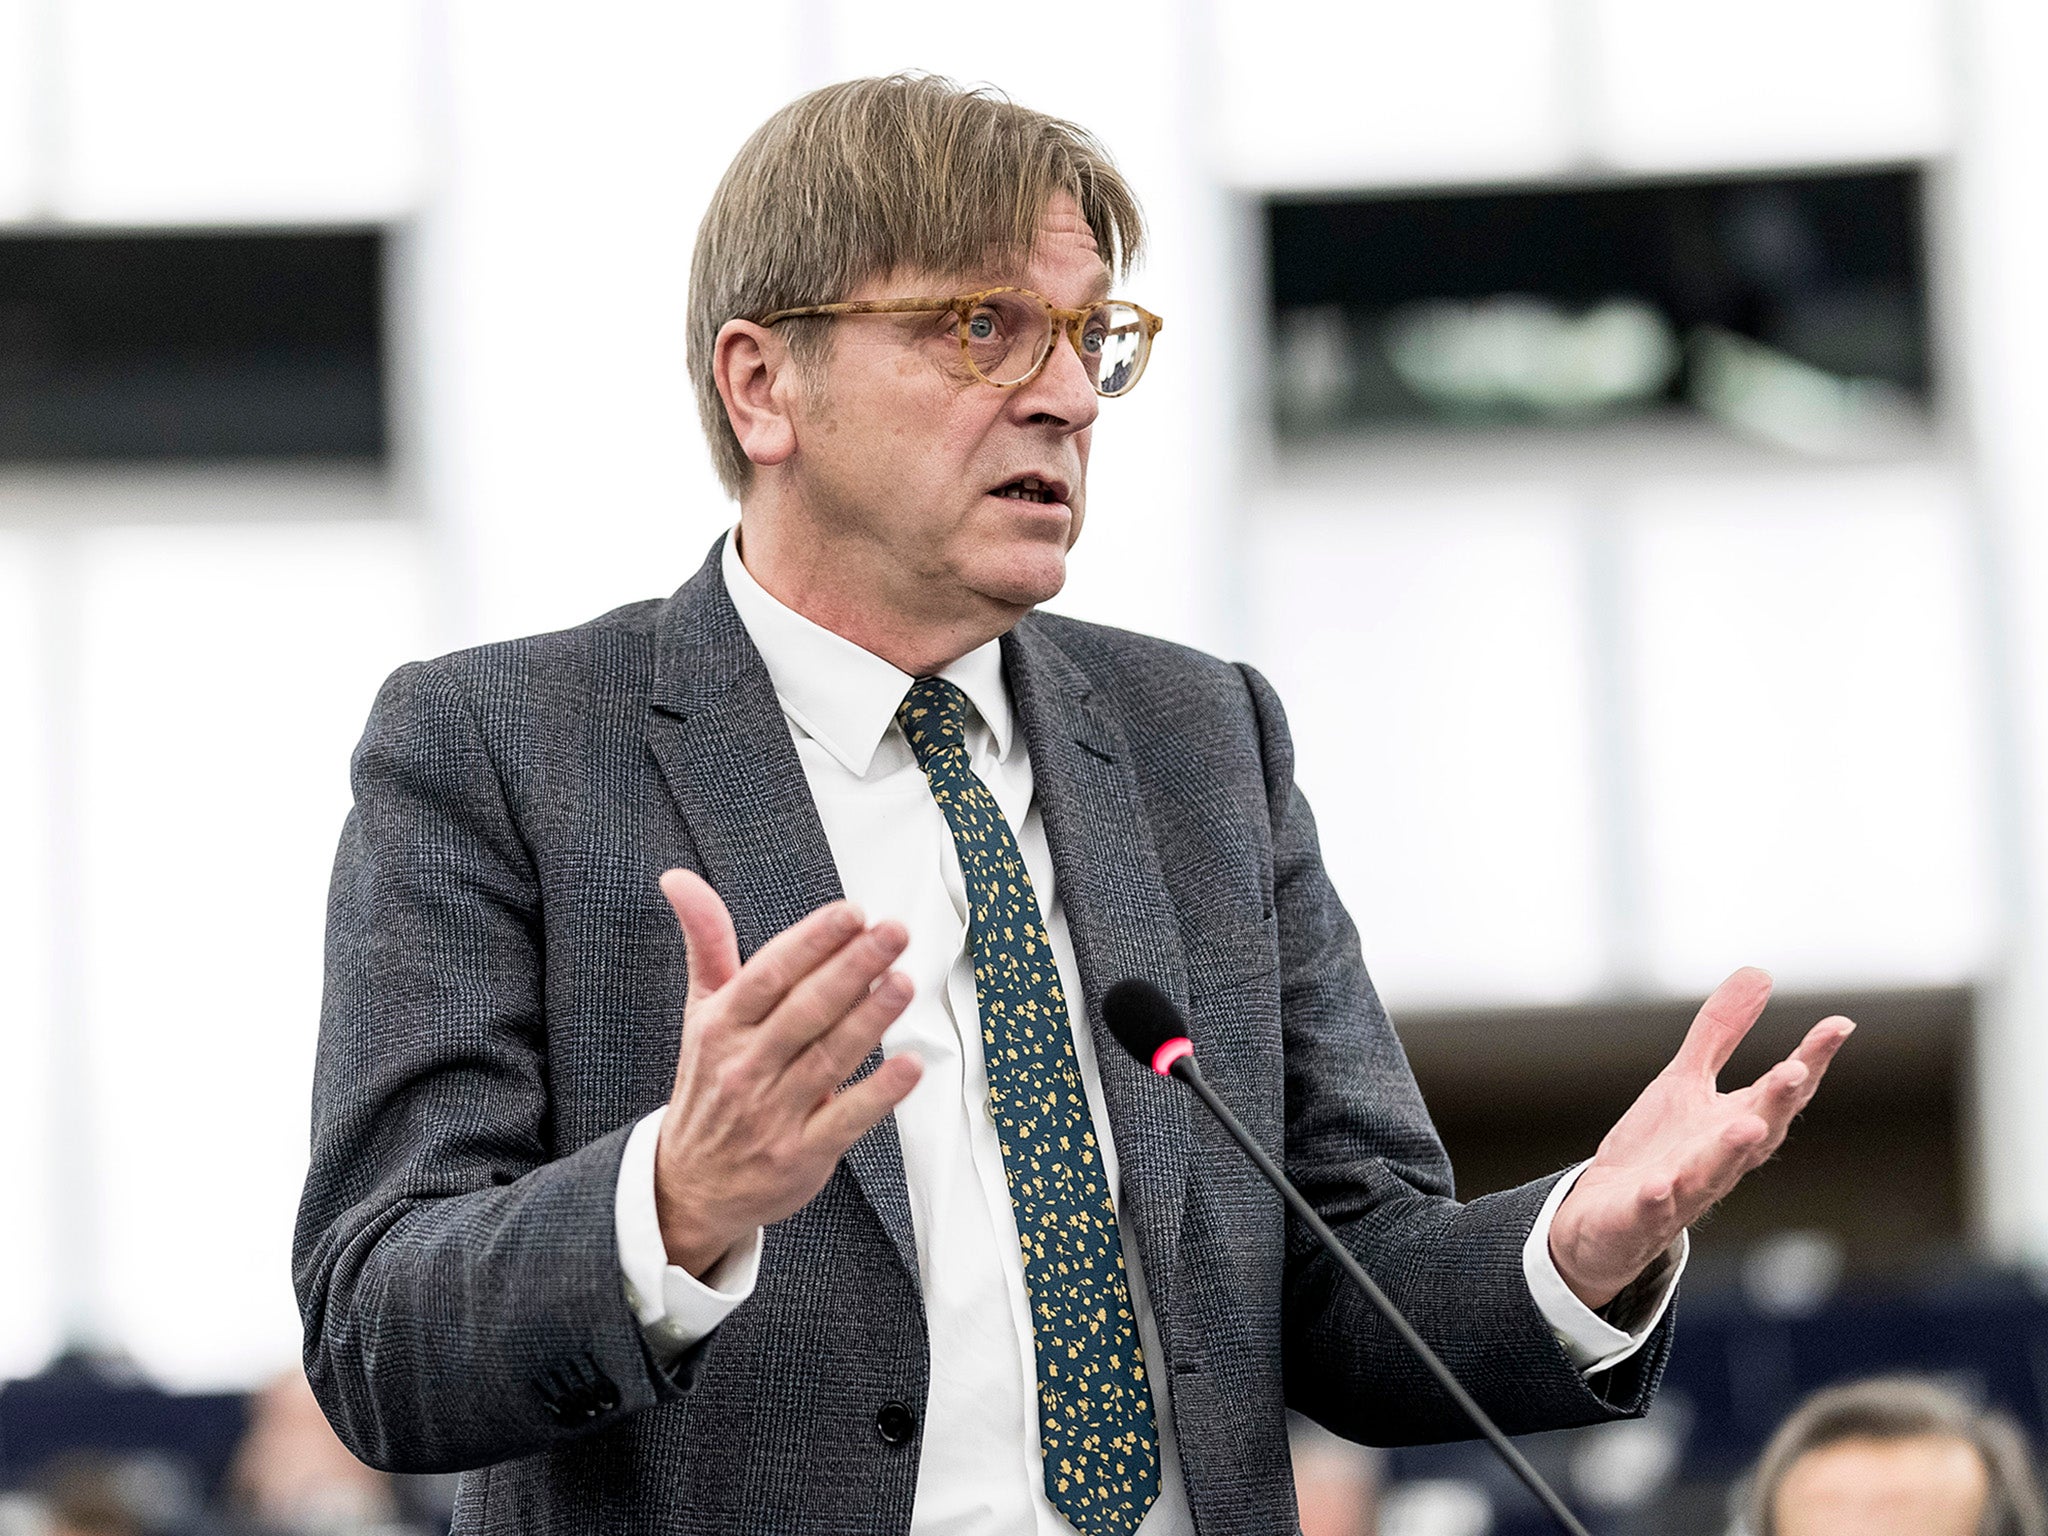 The European Parliament's chief Brexit negotiator has openly mocked the UK's new blue passports